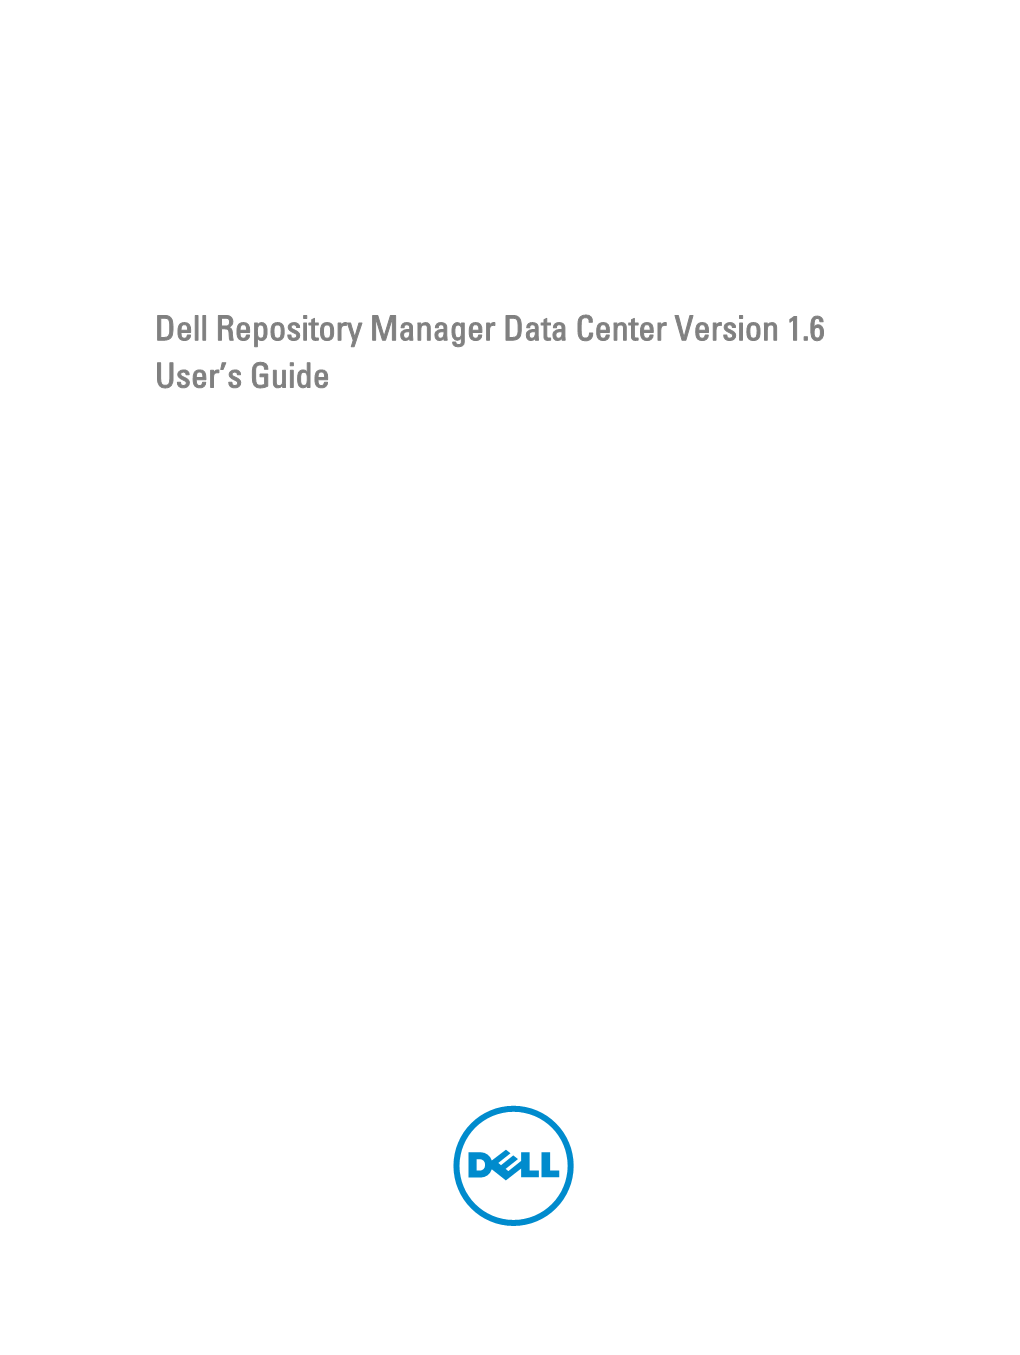 Dell Repository Manager Version 1.6 User's Guide